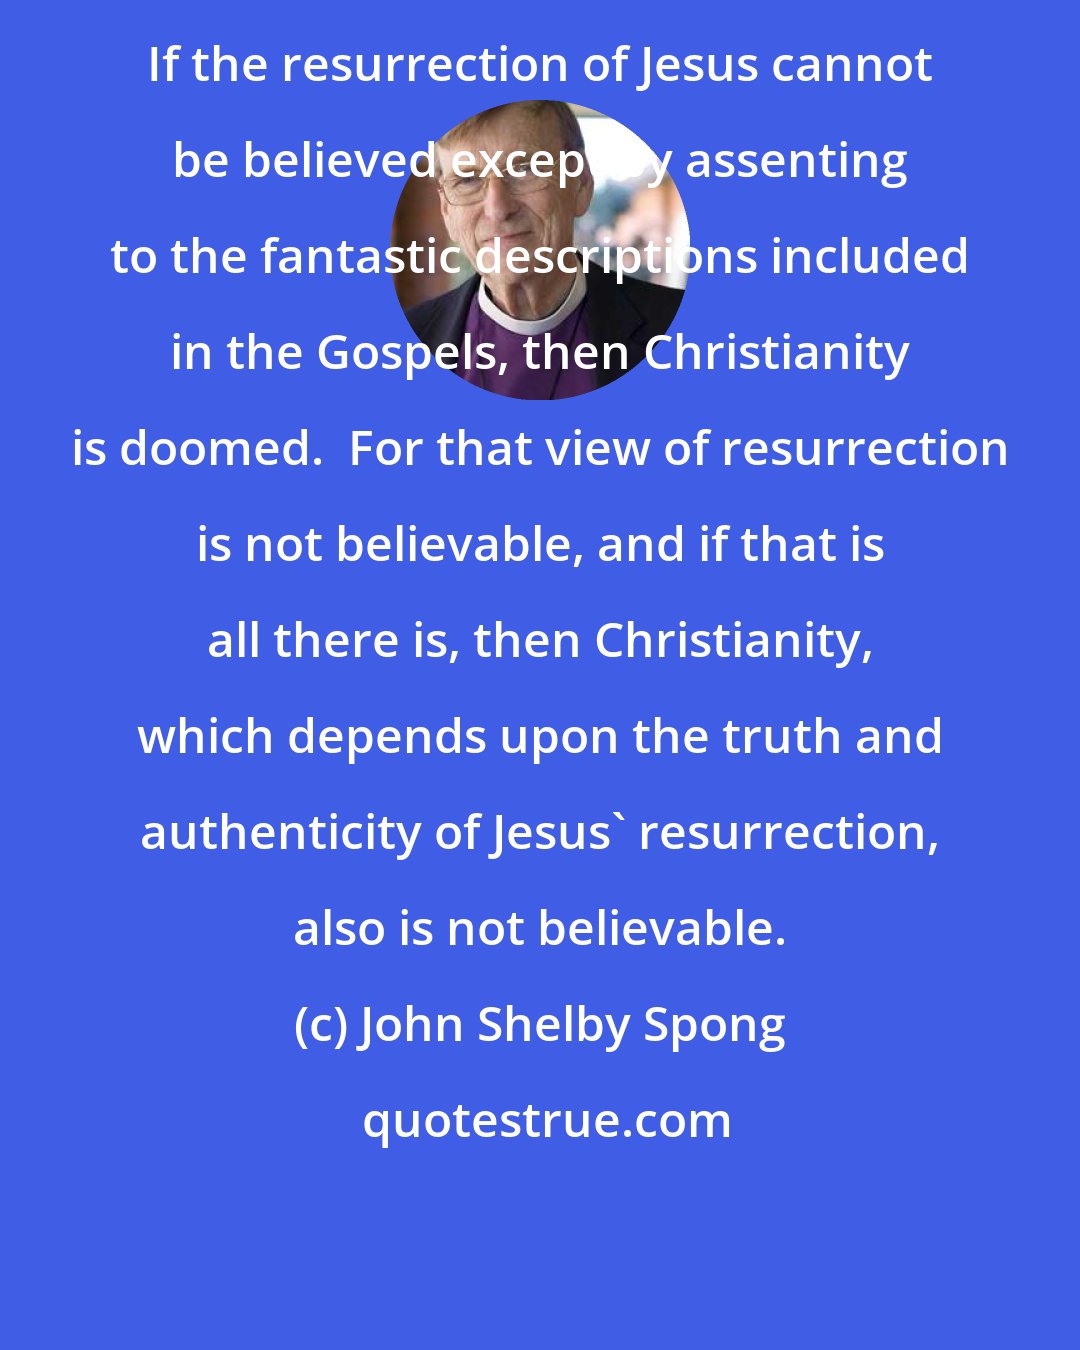 John Shelby Spong: If the resurrection of Jesus cannot be believed except by assenting to the fantastic descriptions included in the Gospels, then Christianity is doomed.  For that view of resurrection is not believable, and if that is all there is, then Christianity, which depends upon the truth and authenticity of Jesus' resurrection, also is not believable.